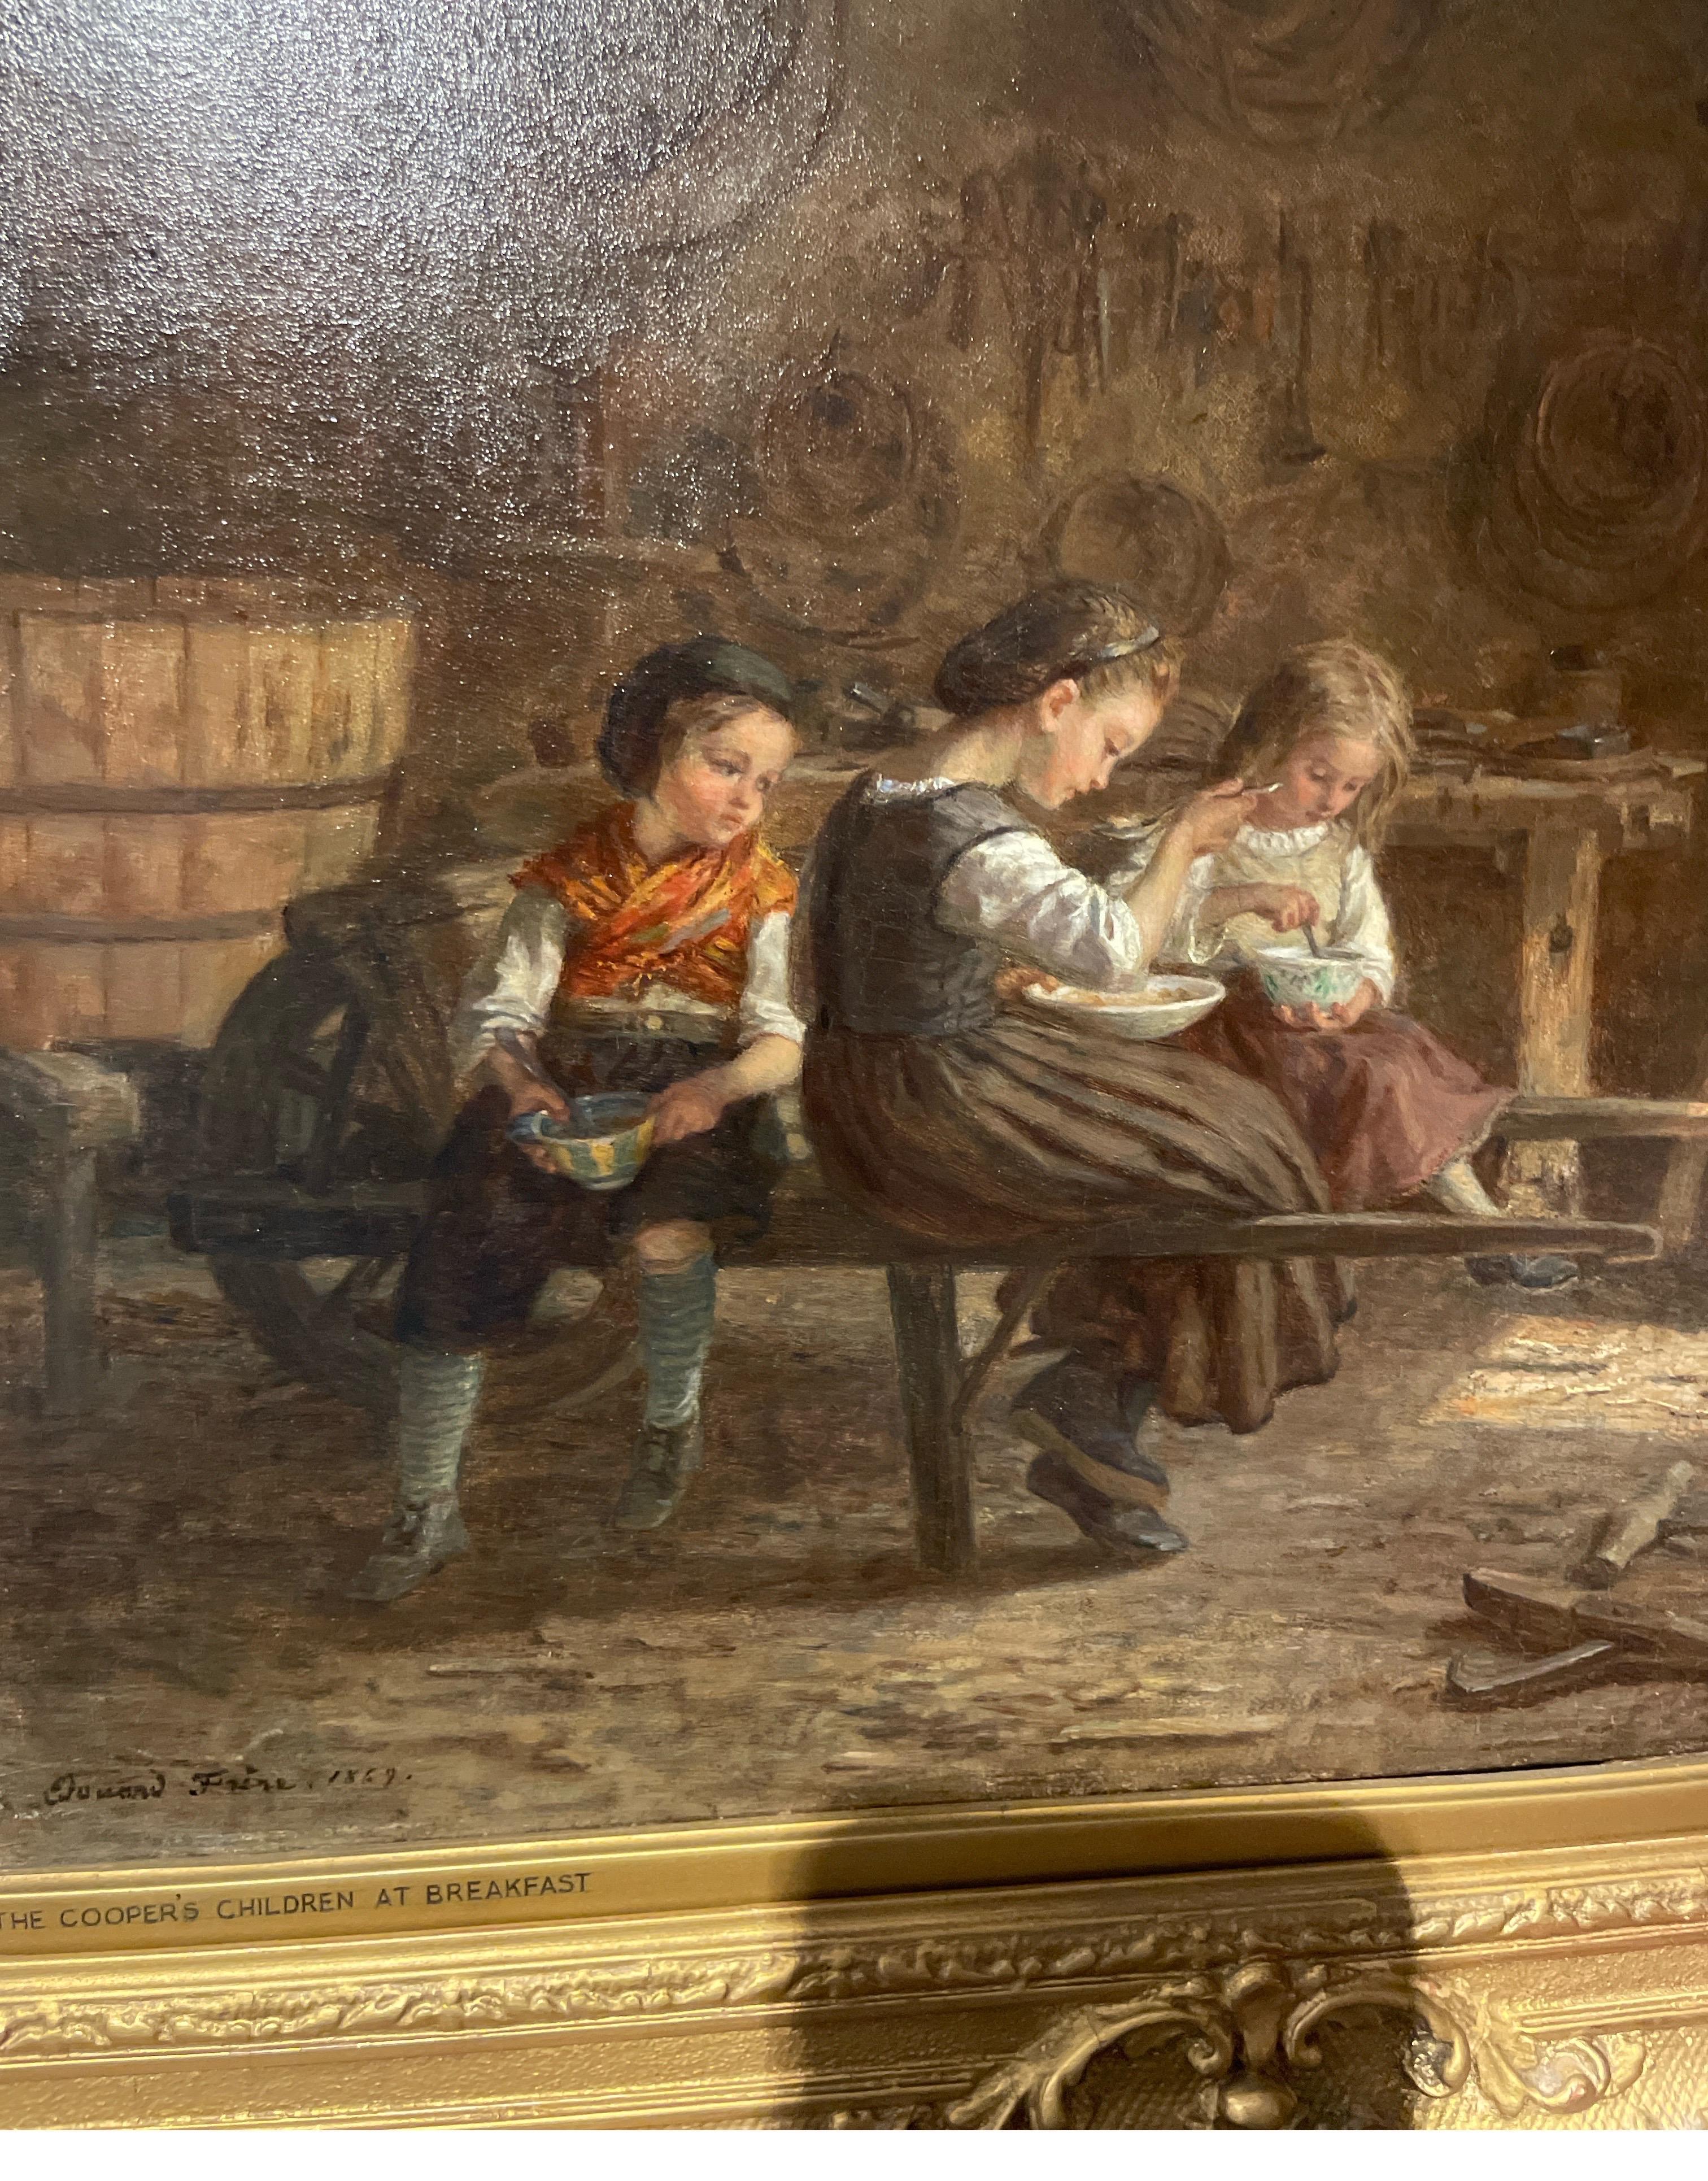 Painted by Eduardo Frere in 1869
Signed lower left
Title :The Coopers Children at Breakfast 

Frère studied under Paul Delaroche, entered the École des Beaux-Arts in 1836 and exhibited first at the Salon in 1843. Among his chief works are the two